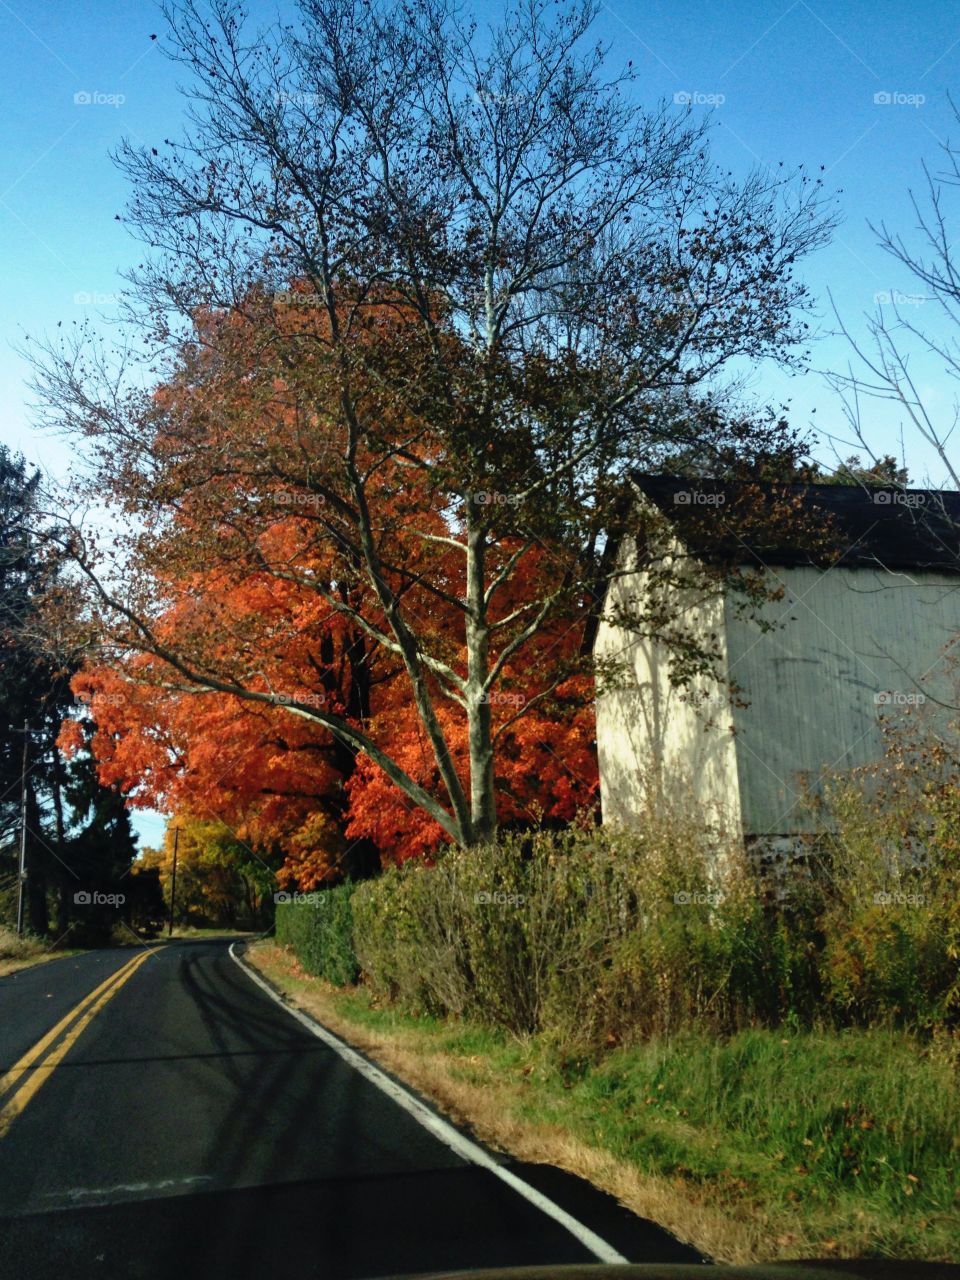 Fall road. Fall landscape on the way home